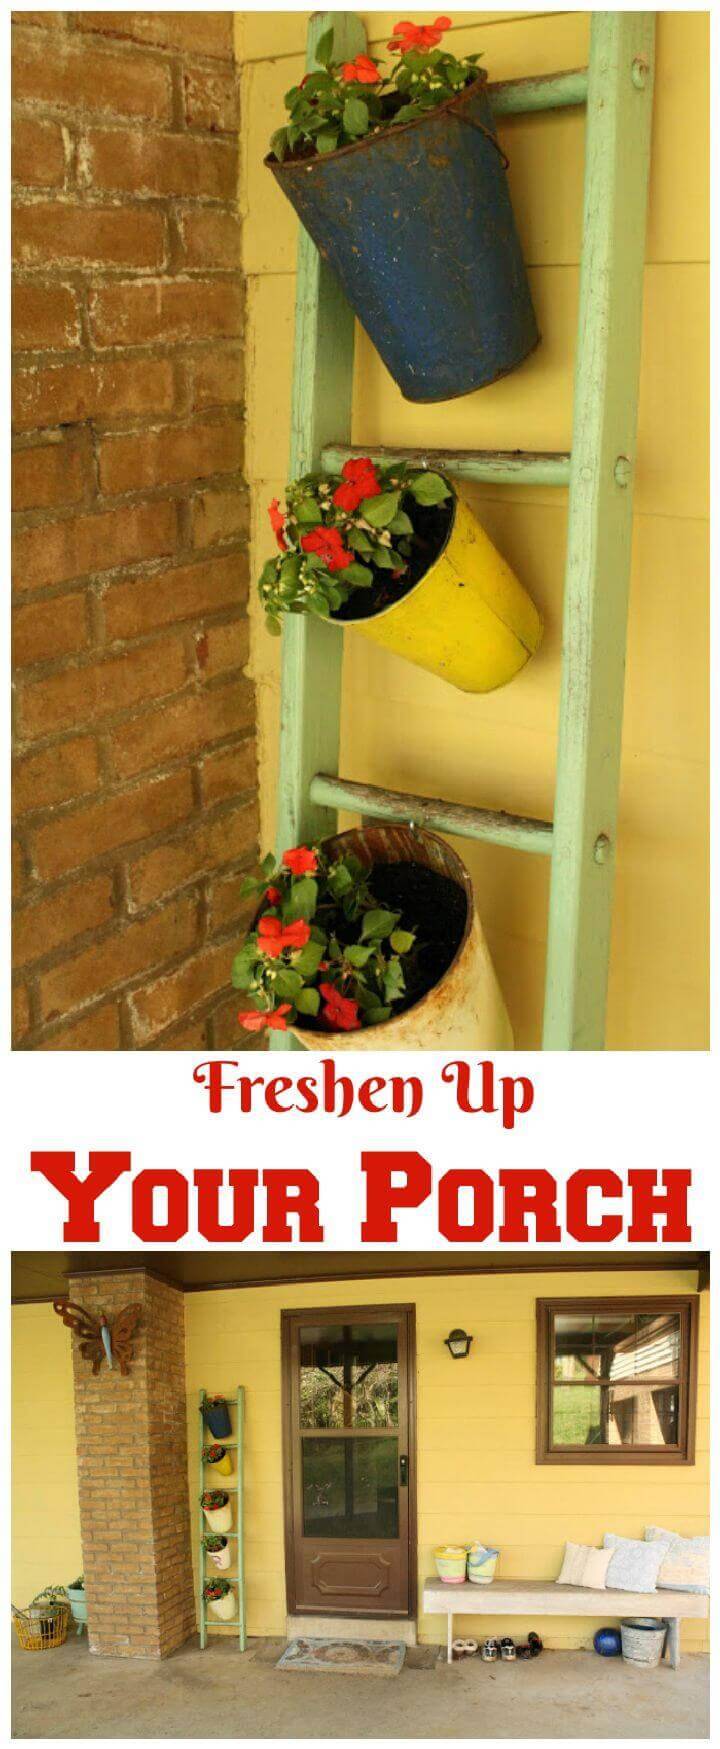 Freshen Up Your Porch